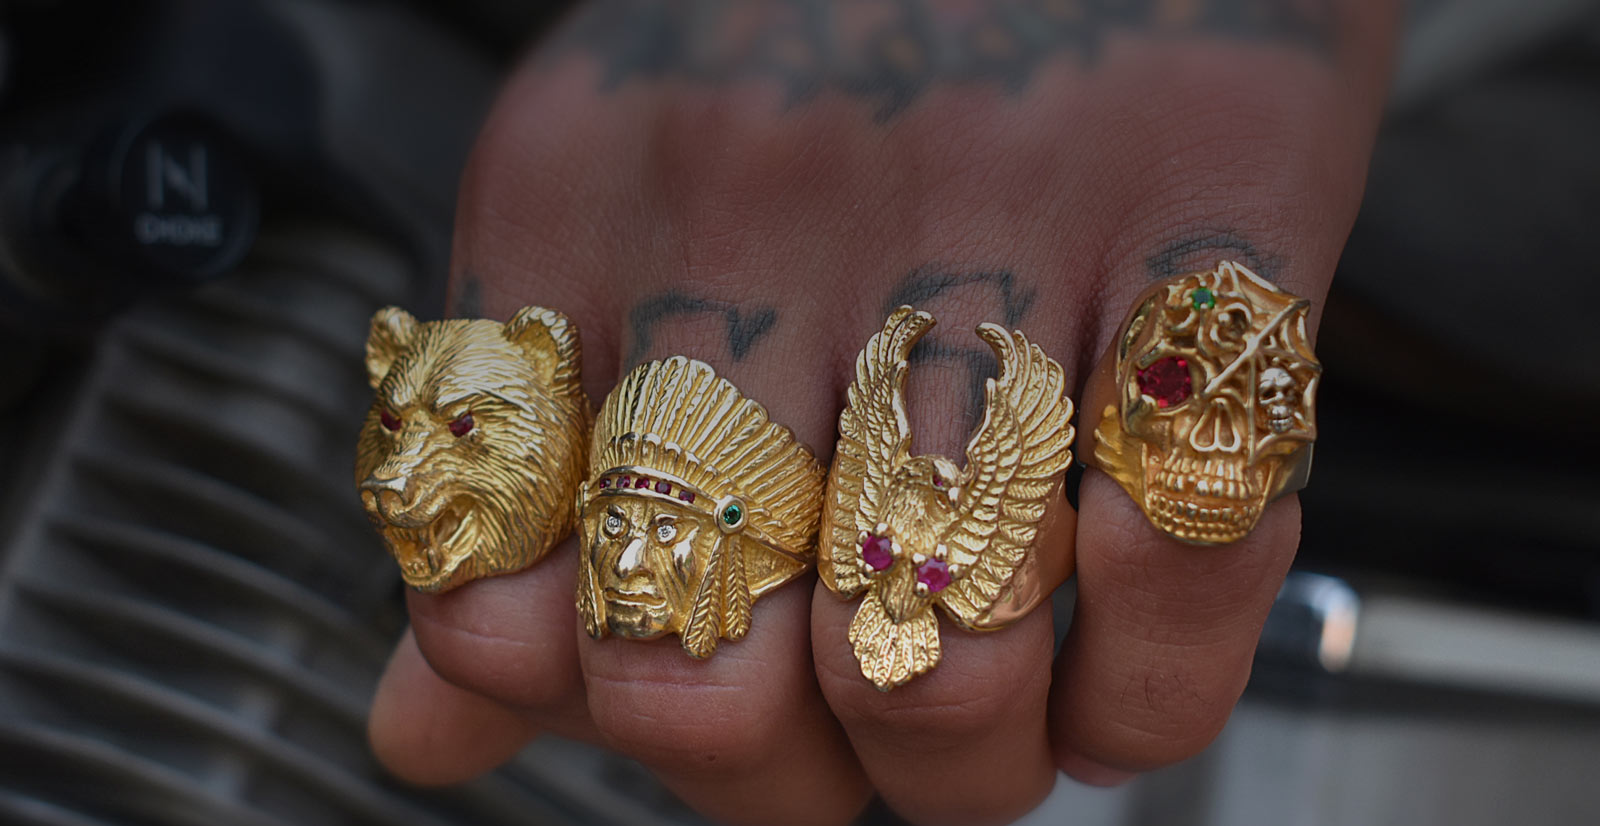 Sturgis Jewelry gold rings; bear, Indian chief, eagle, skull with stones rings